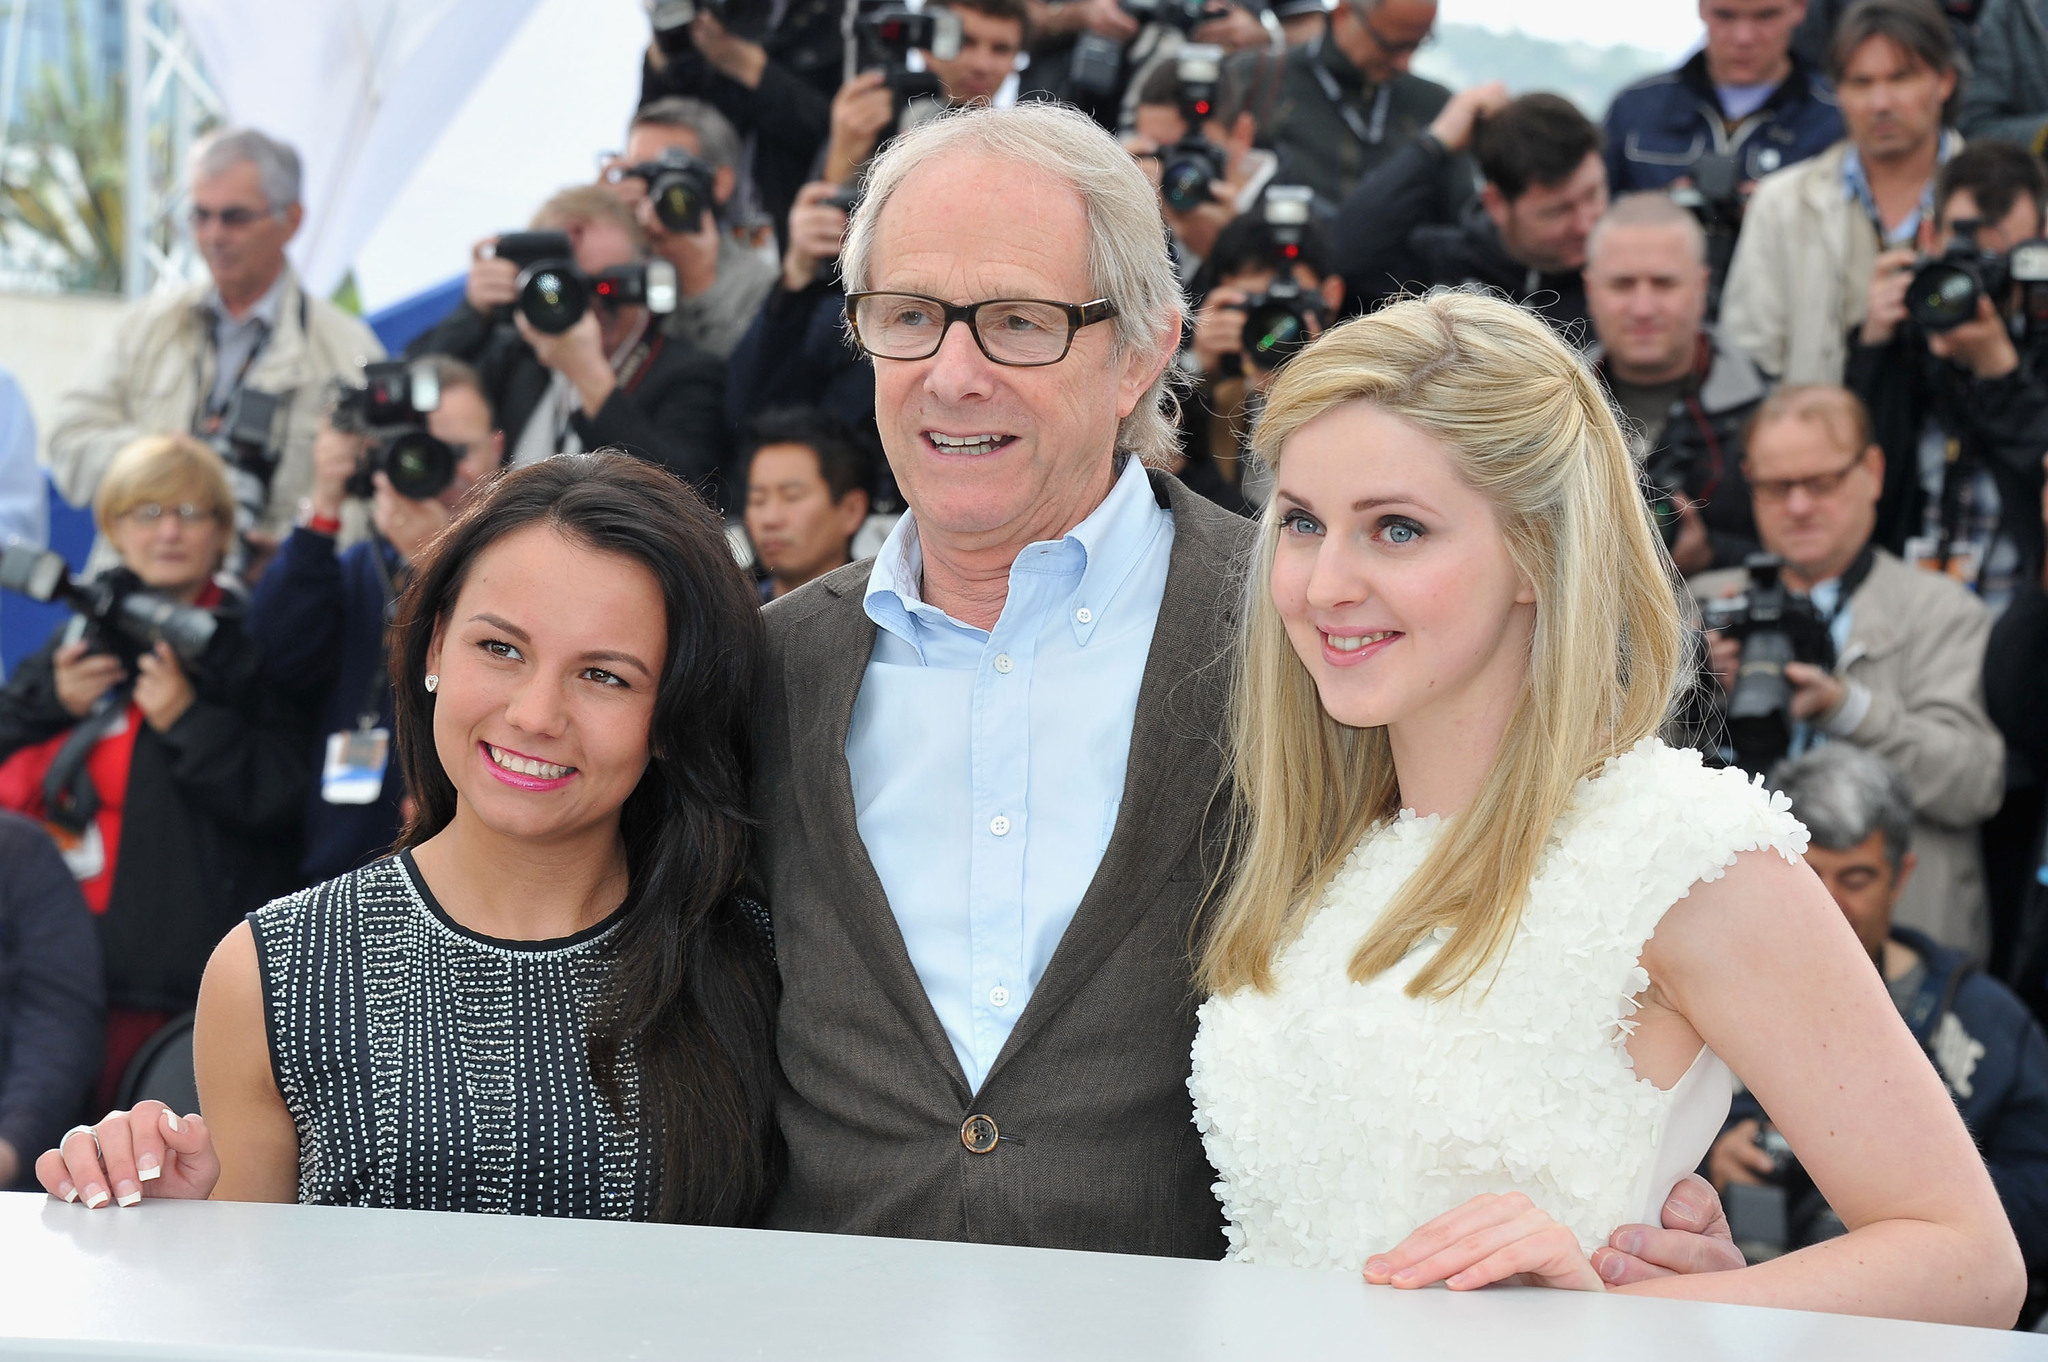 Ken Loach, Siobhan Reilly and Jasmin Riggins at event of The Angels' Share (2012)